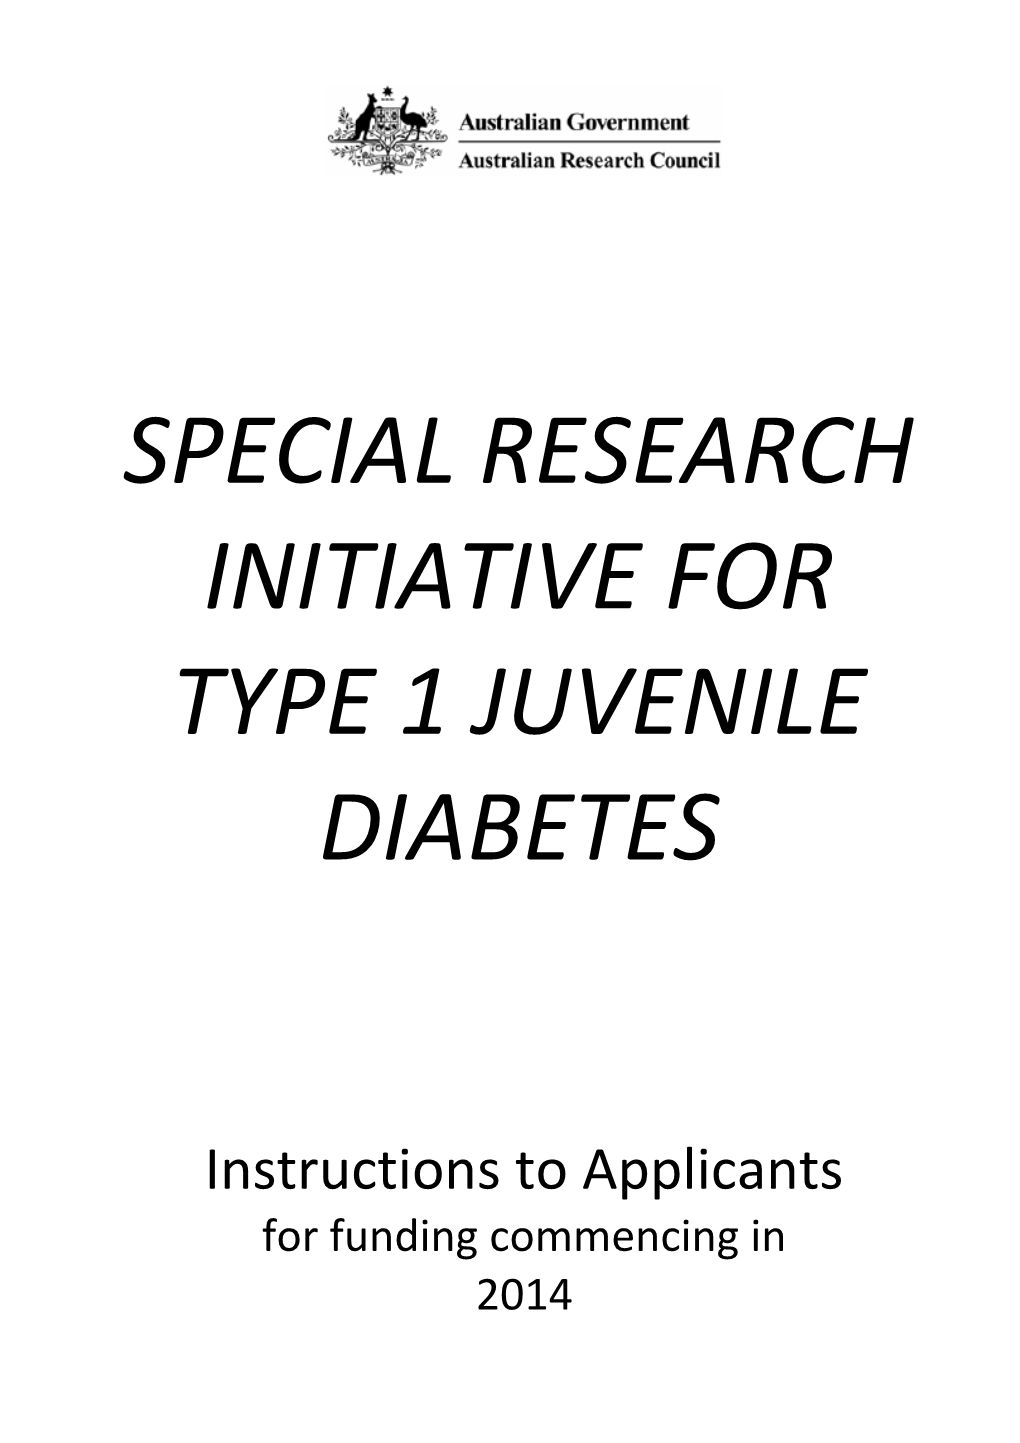 Special Research Initiatives Instructions to Applicants for Funding Commencing in 2014